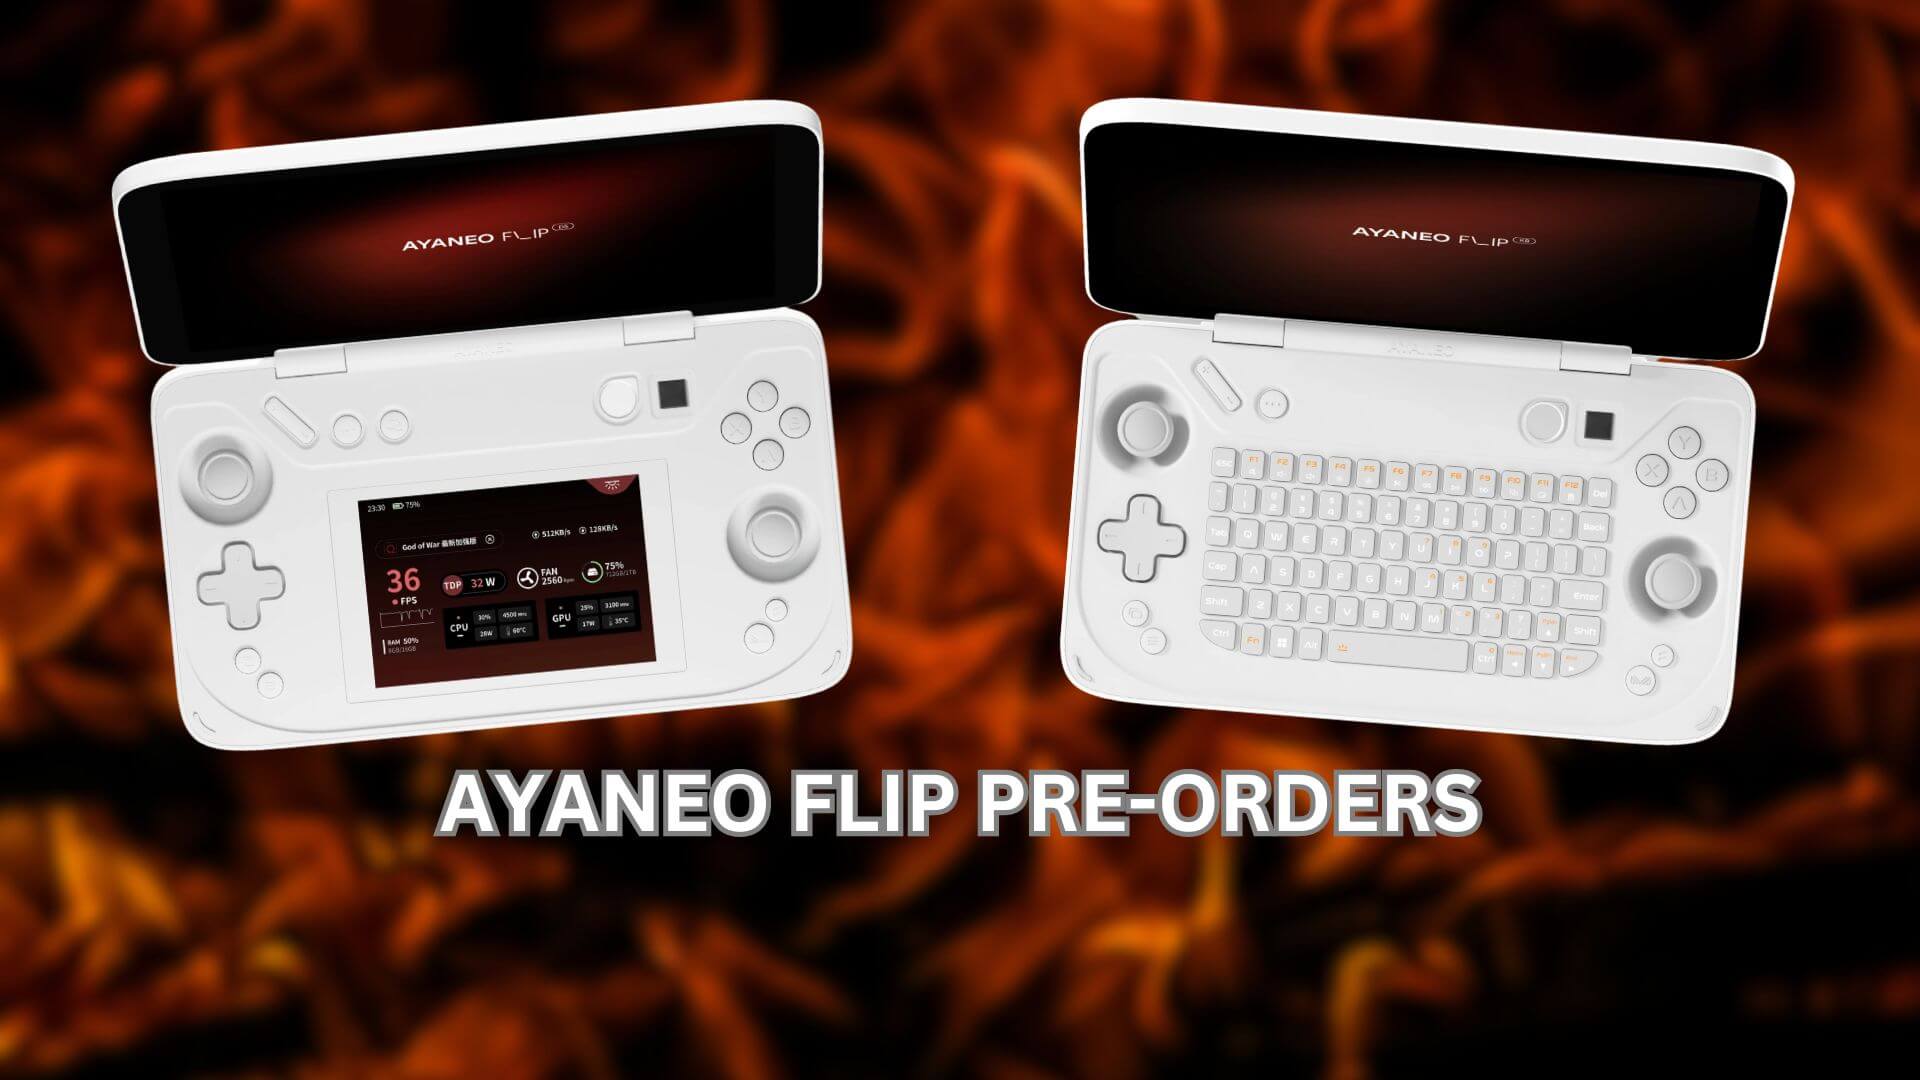 AYANEO Flip pre-orders available